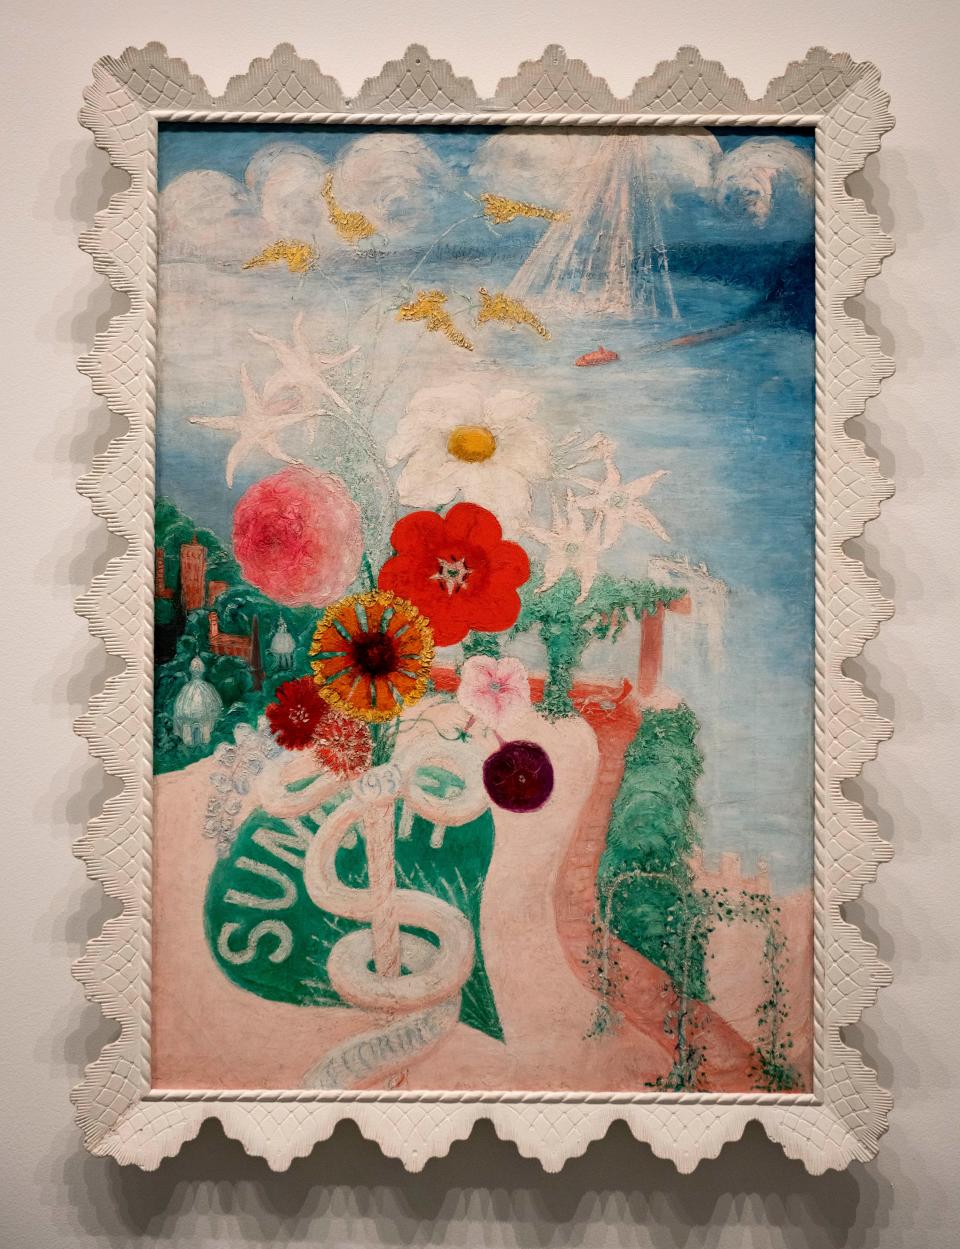 Sun, 1931, oil on canvas with frame by Florine Stettheimer is at the At the Dawn of a New Age: Early Twentieth-Century American Modernism exhibit the Norton from March 18 through July 16, 2023 in West Palm Beach. 